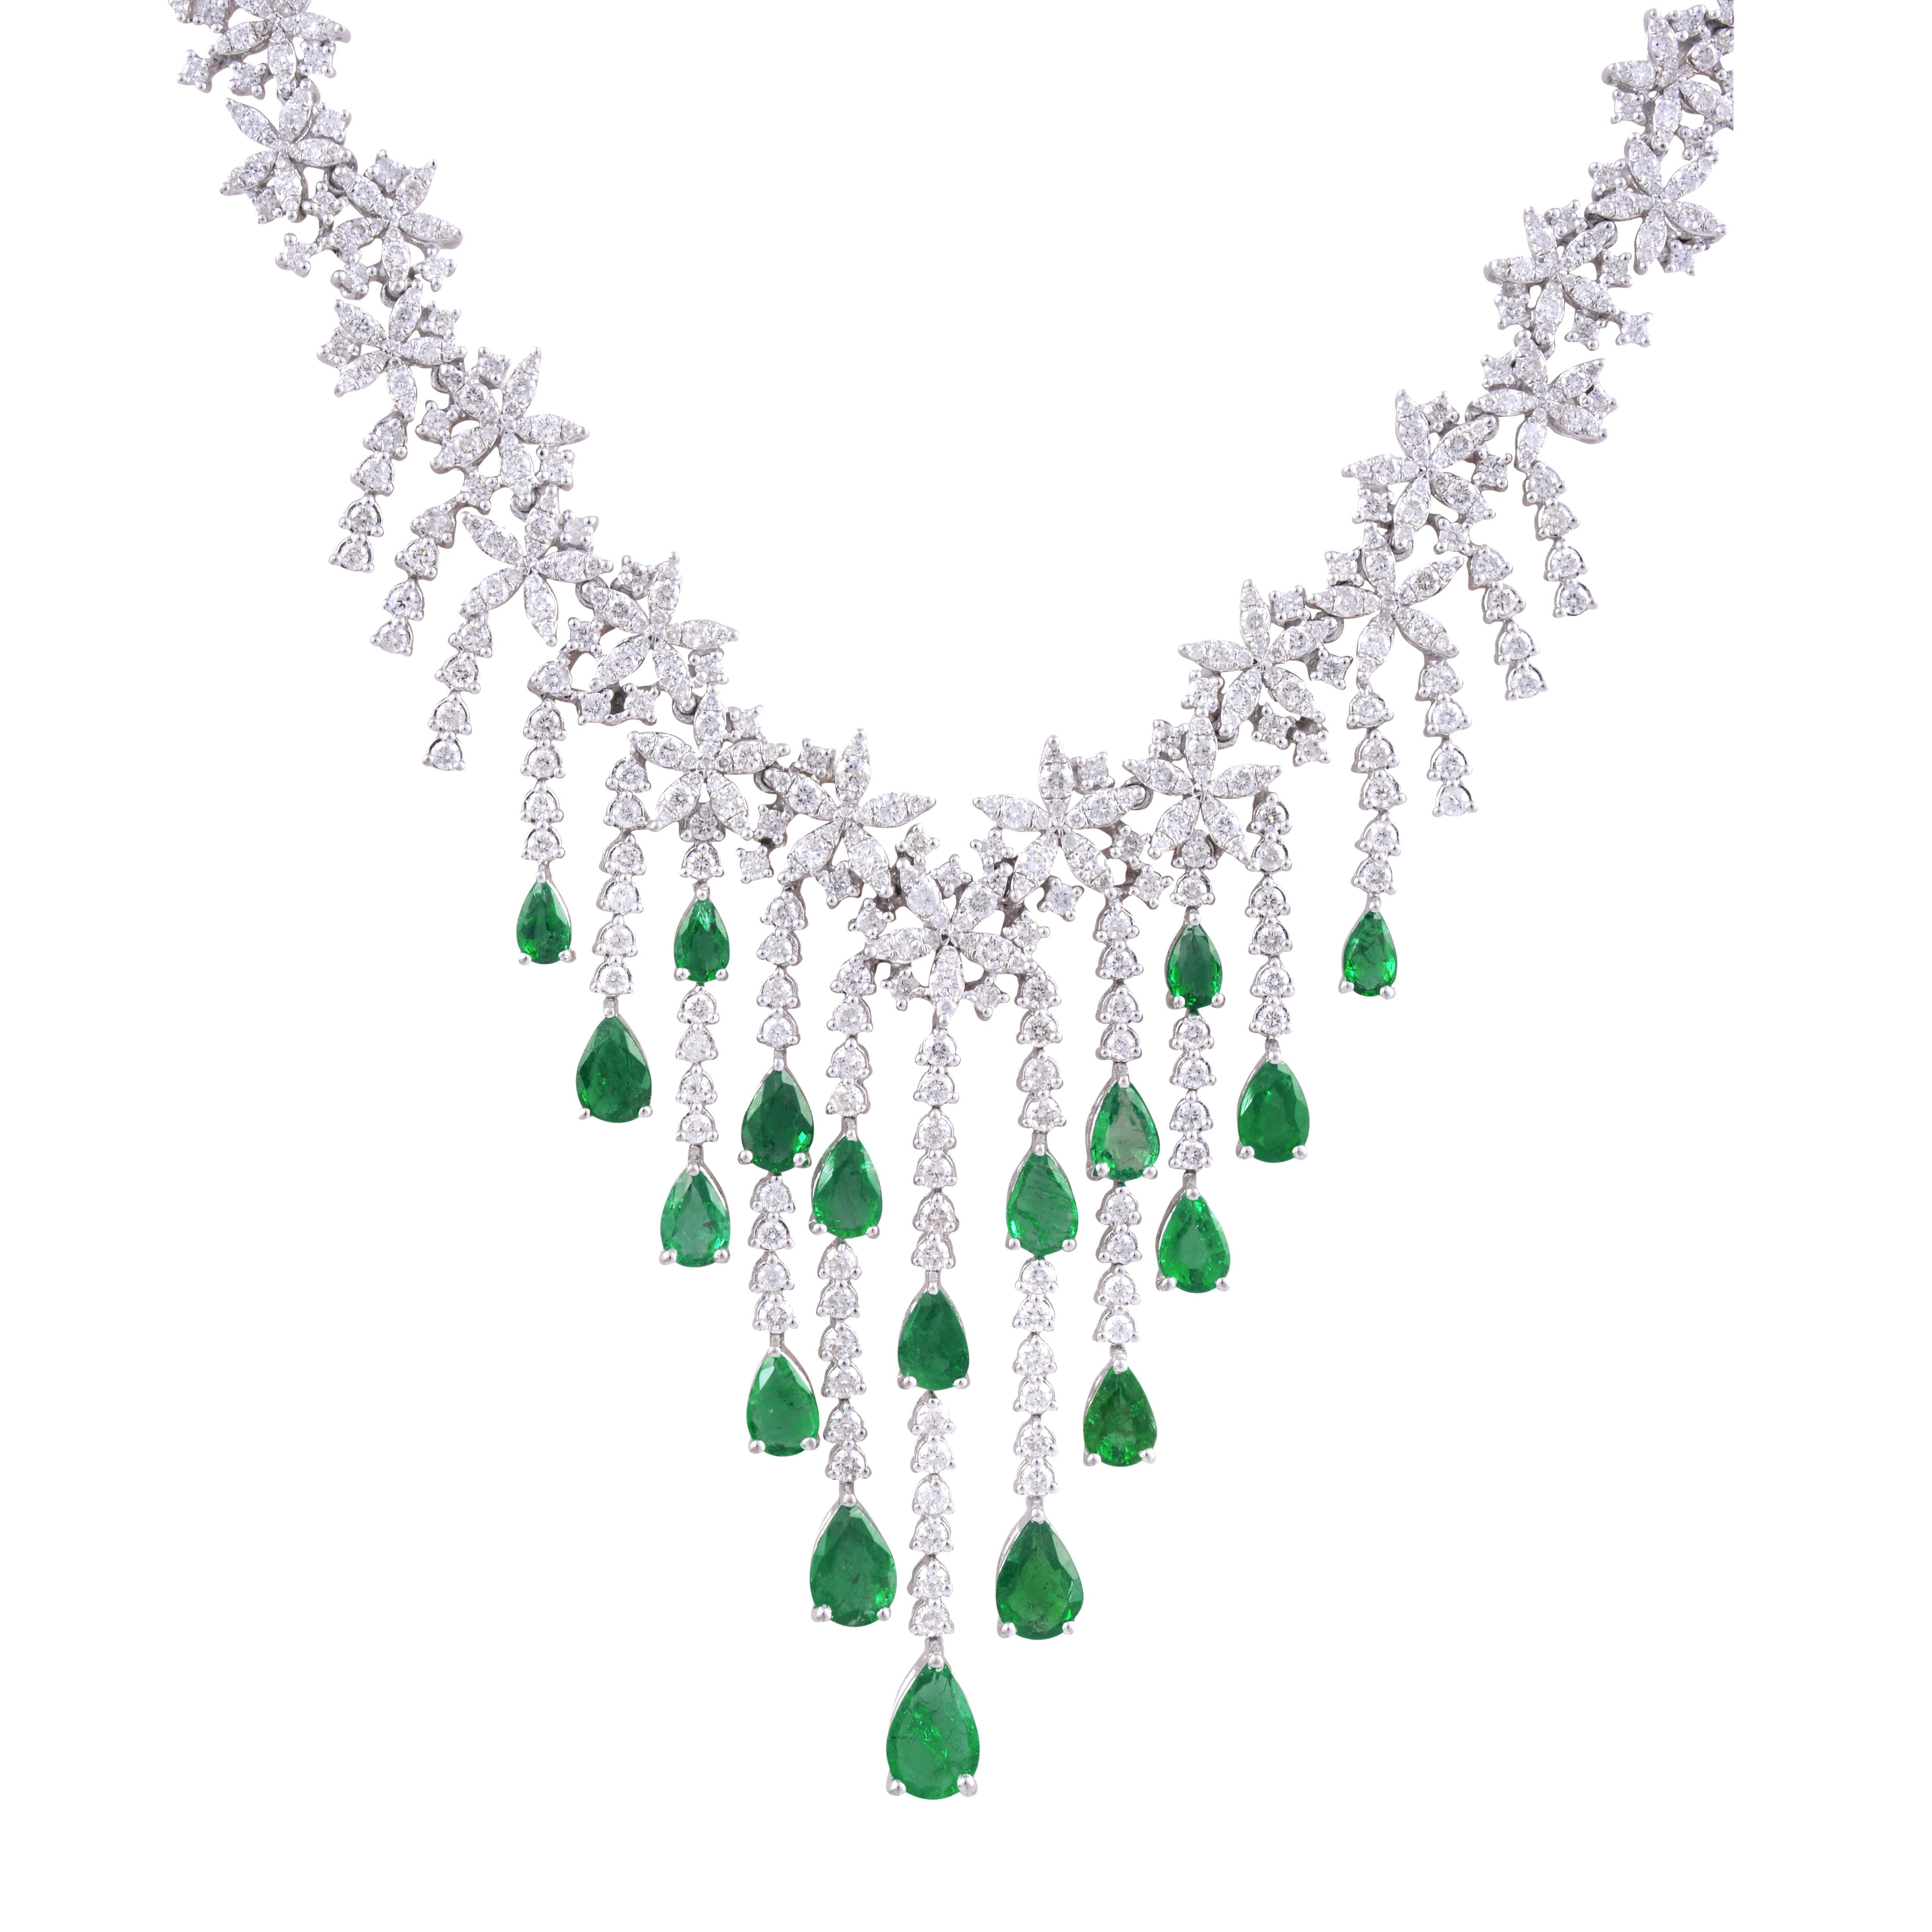 Complementing the emerald are dazzling diamonds that add a touch of brilliance and sophistication. These diamonds are meticulously chosen for their exceptional quality, exhibiting exceptional sparkle and fire. Their presence enhances the overall